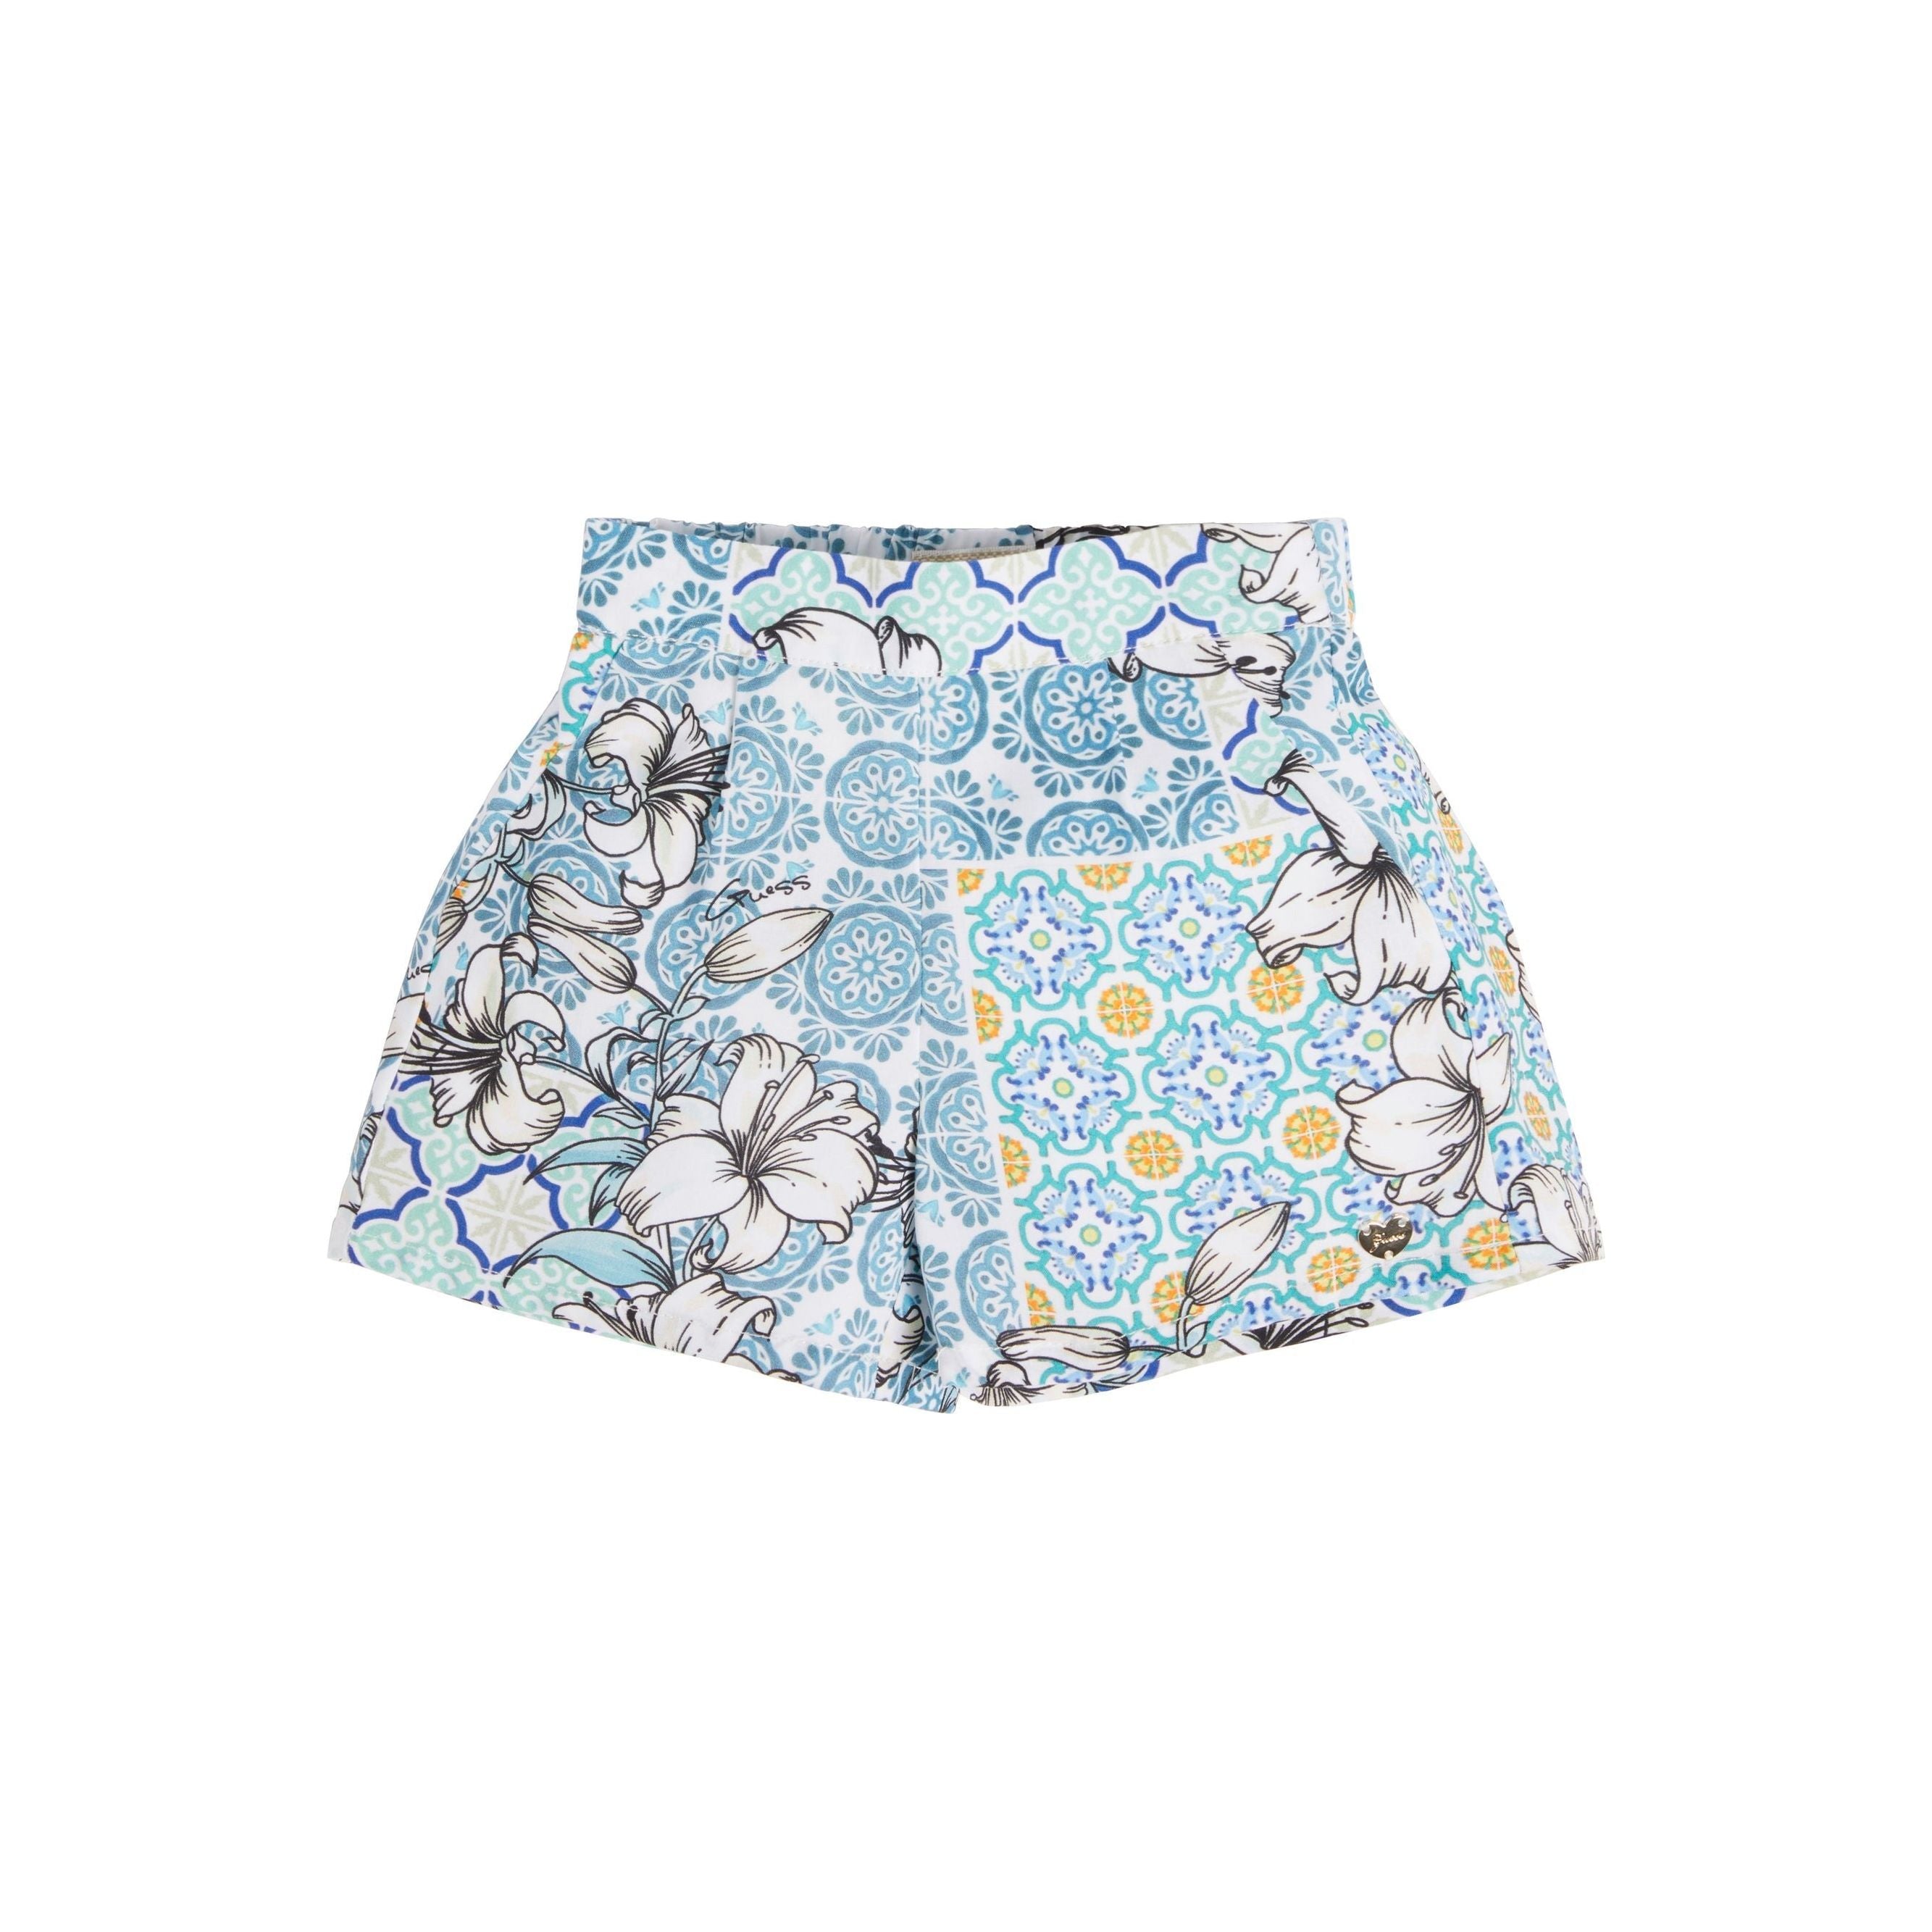 Guess - Toddle Girls Printed Shorts in Blue Tiles-SQ2462206